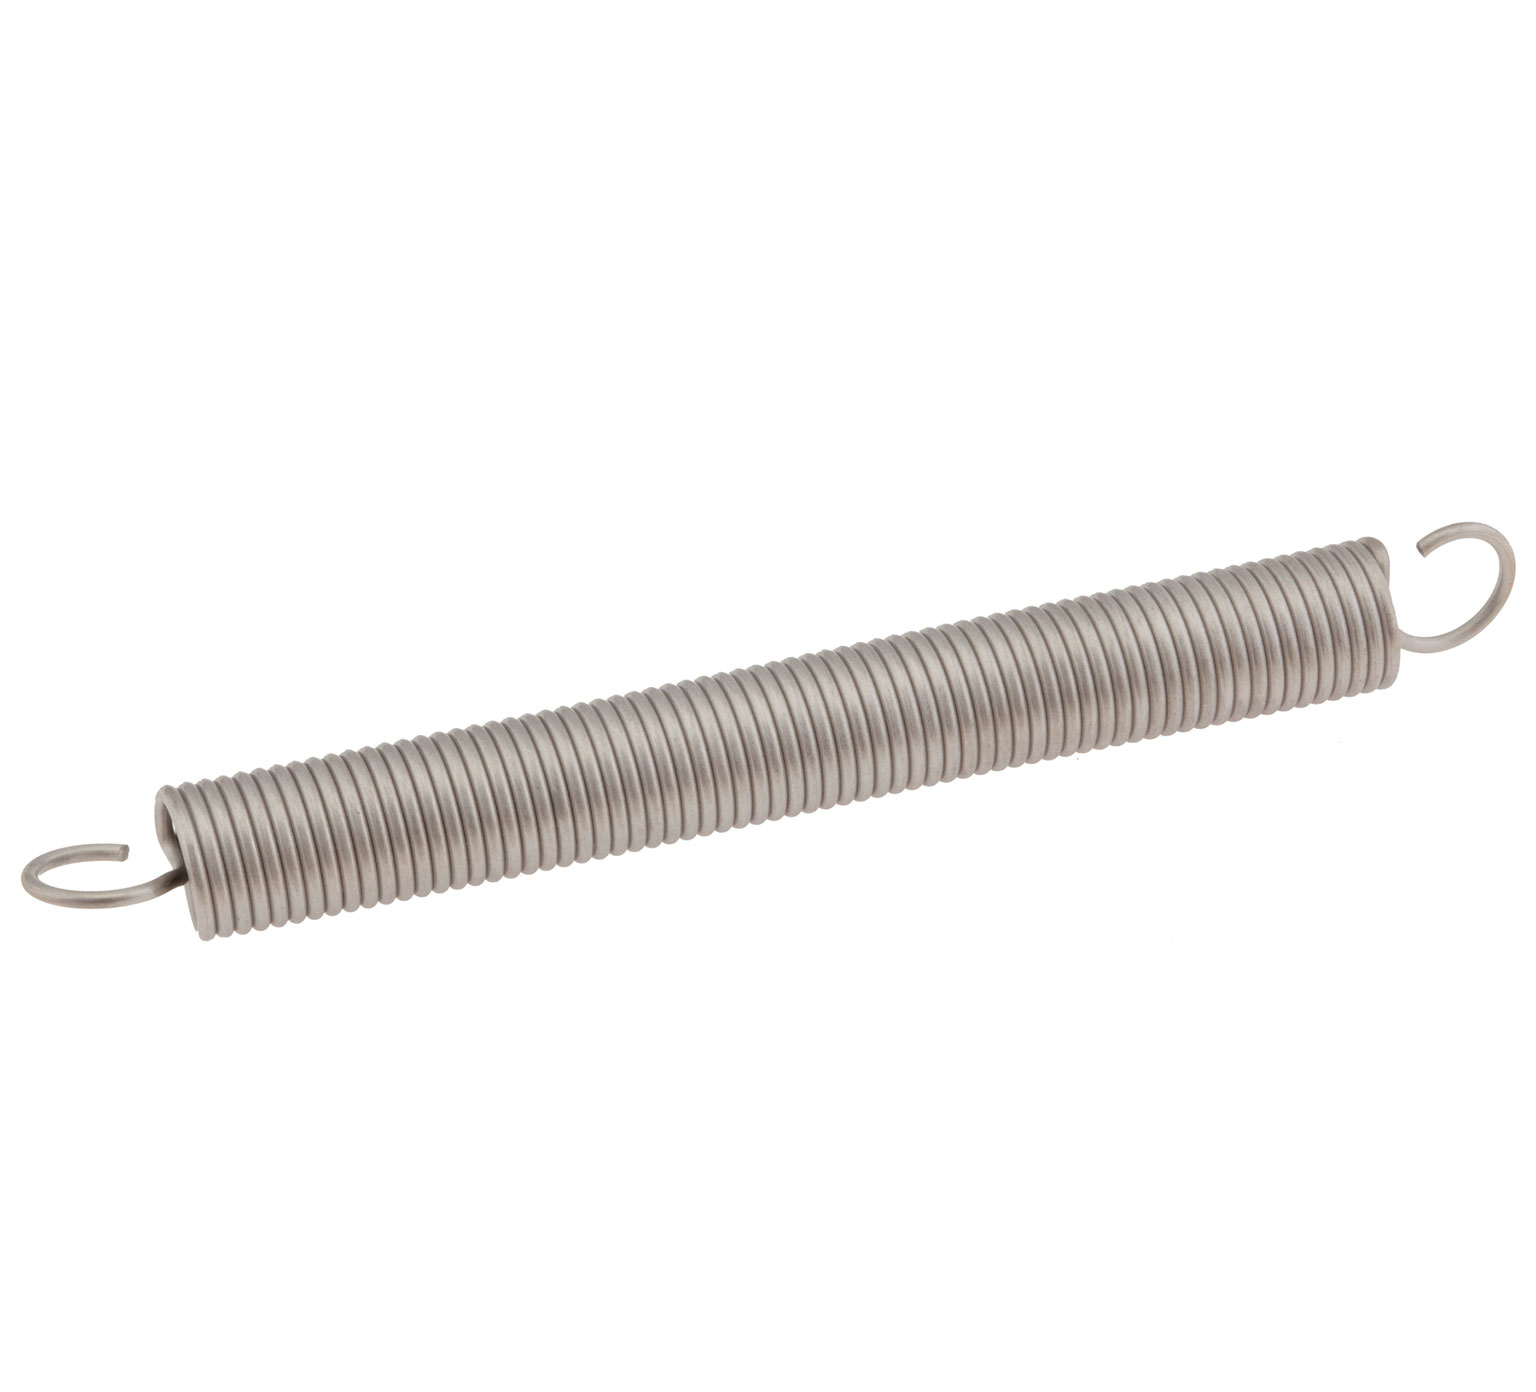 140437 Stainless Steel Extension Spring - 0.625 x 6 in alt 1